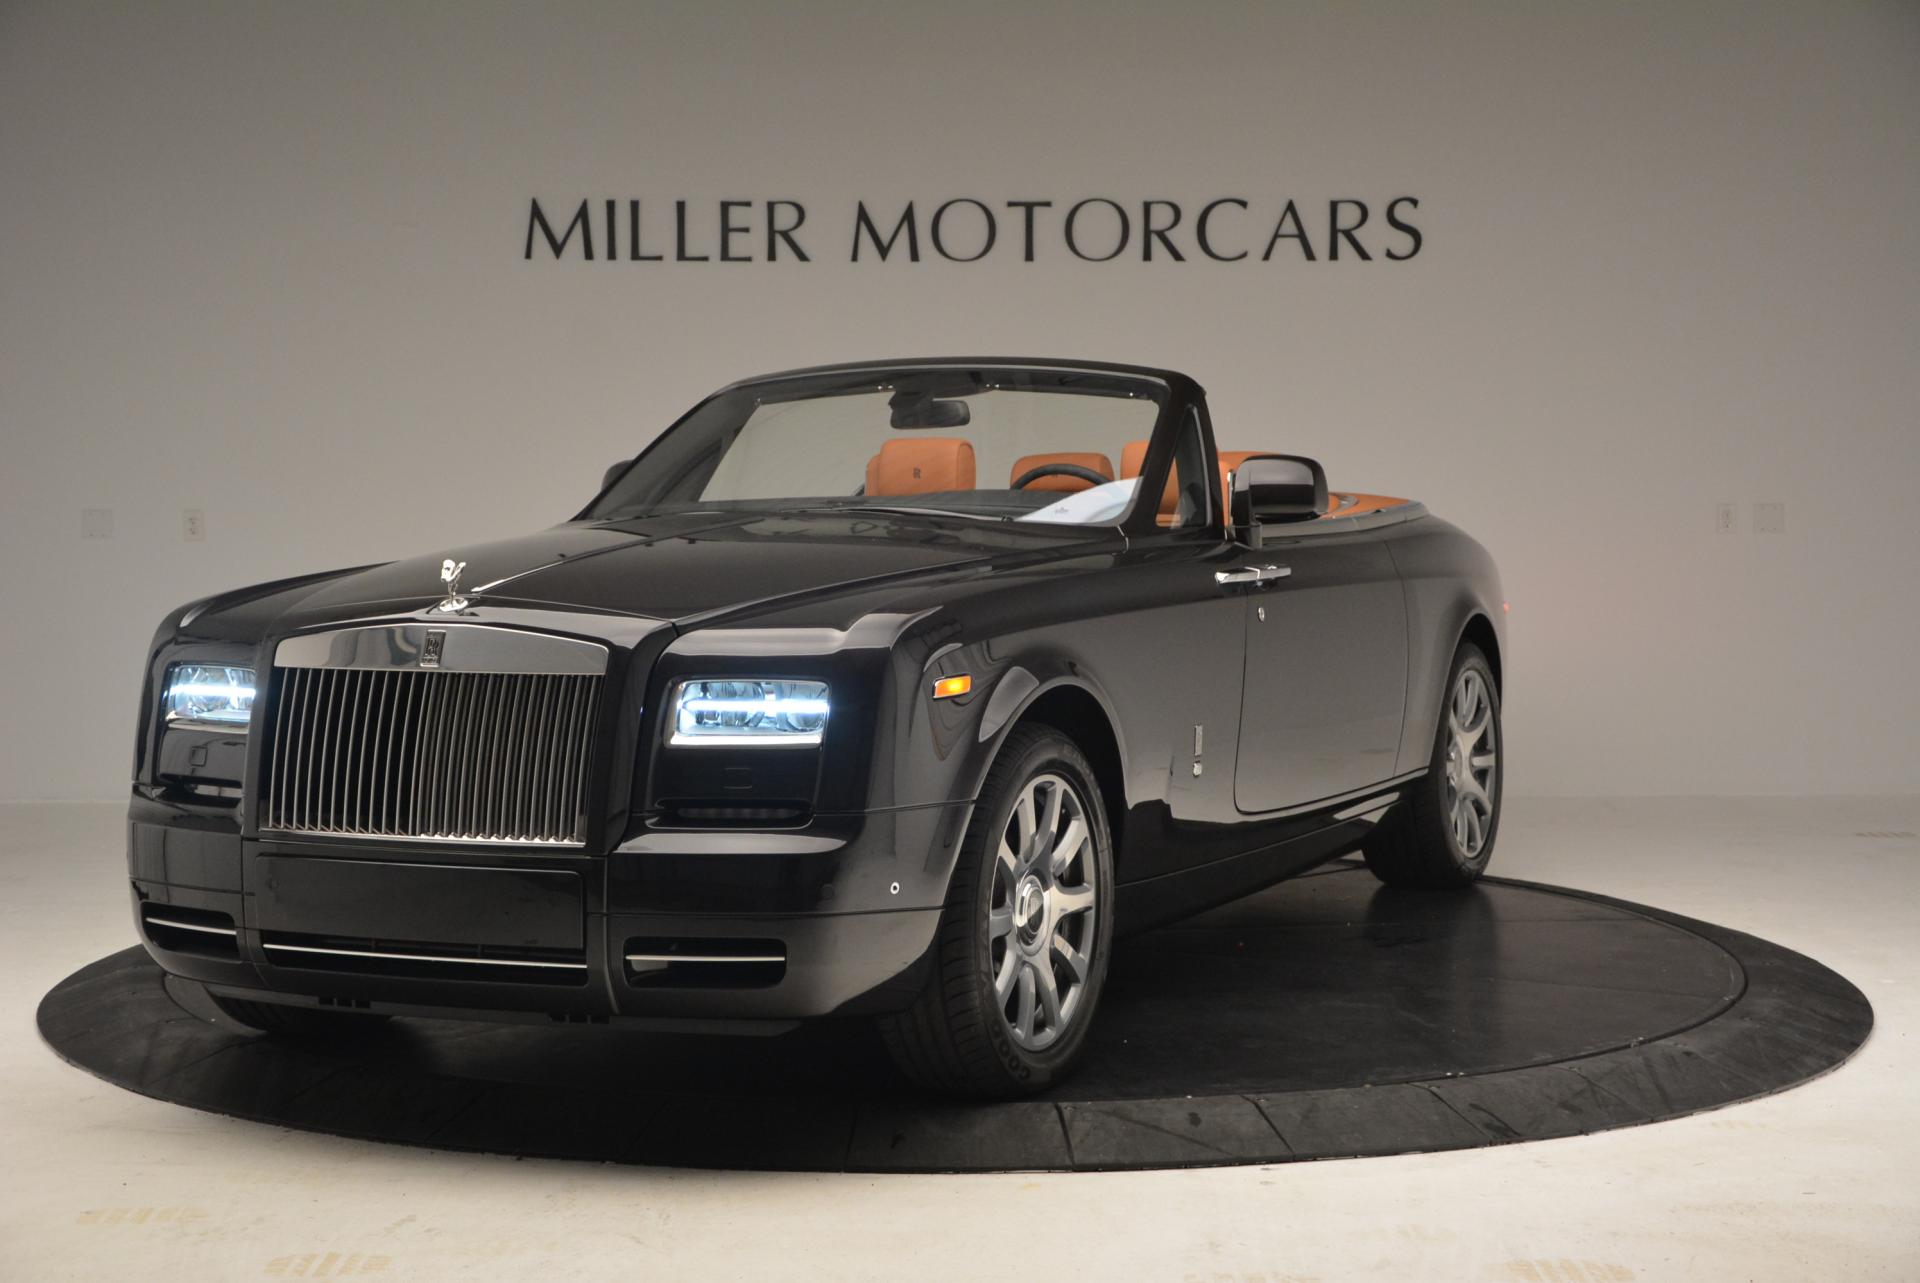 New 2016 Rolls-Royce Phantom Drophead Coupe Bespoke for sale Sold at Pagani of Greenwich in Greenwich CT 06830 1